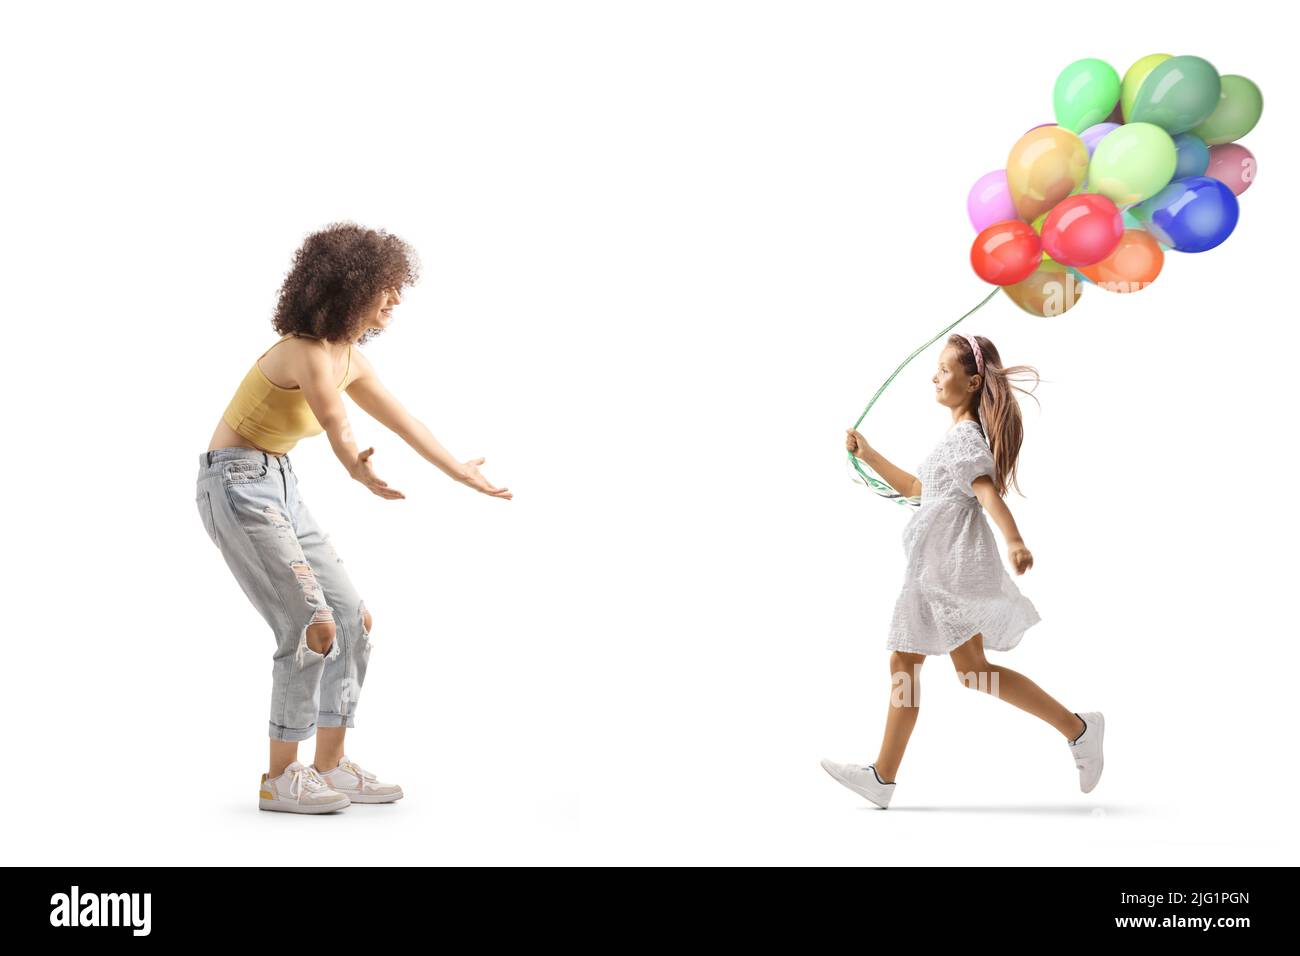 Full length profile shot of a girl with balloons running towards a young woman isolated on white background Stock Photo